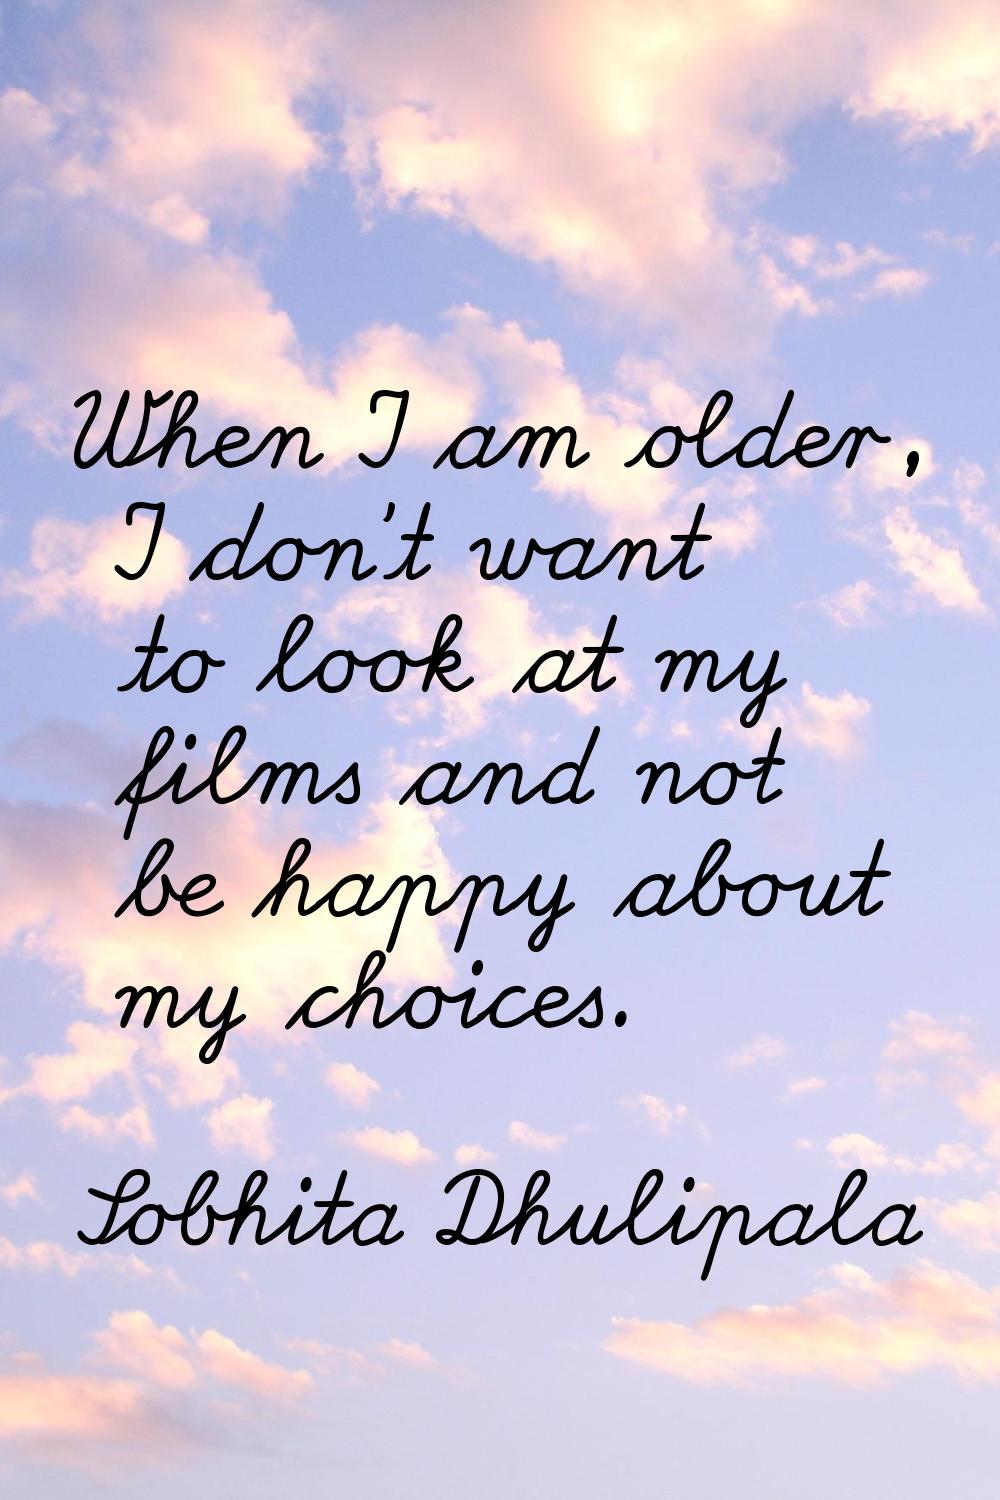 When I am older, I don't want to look at my films and not be happy about my choices.